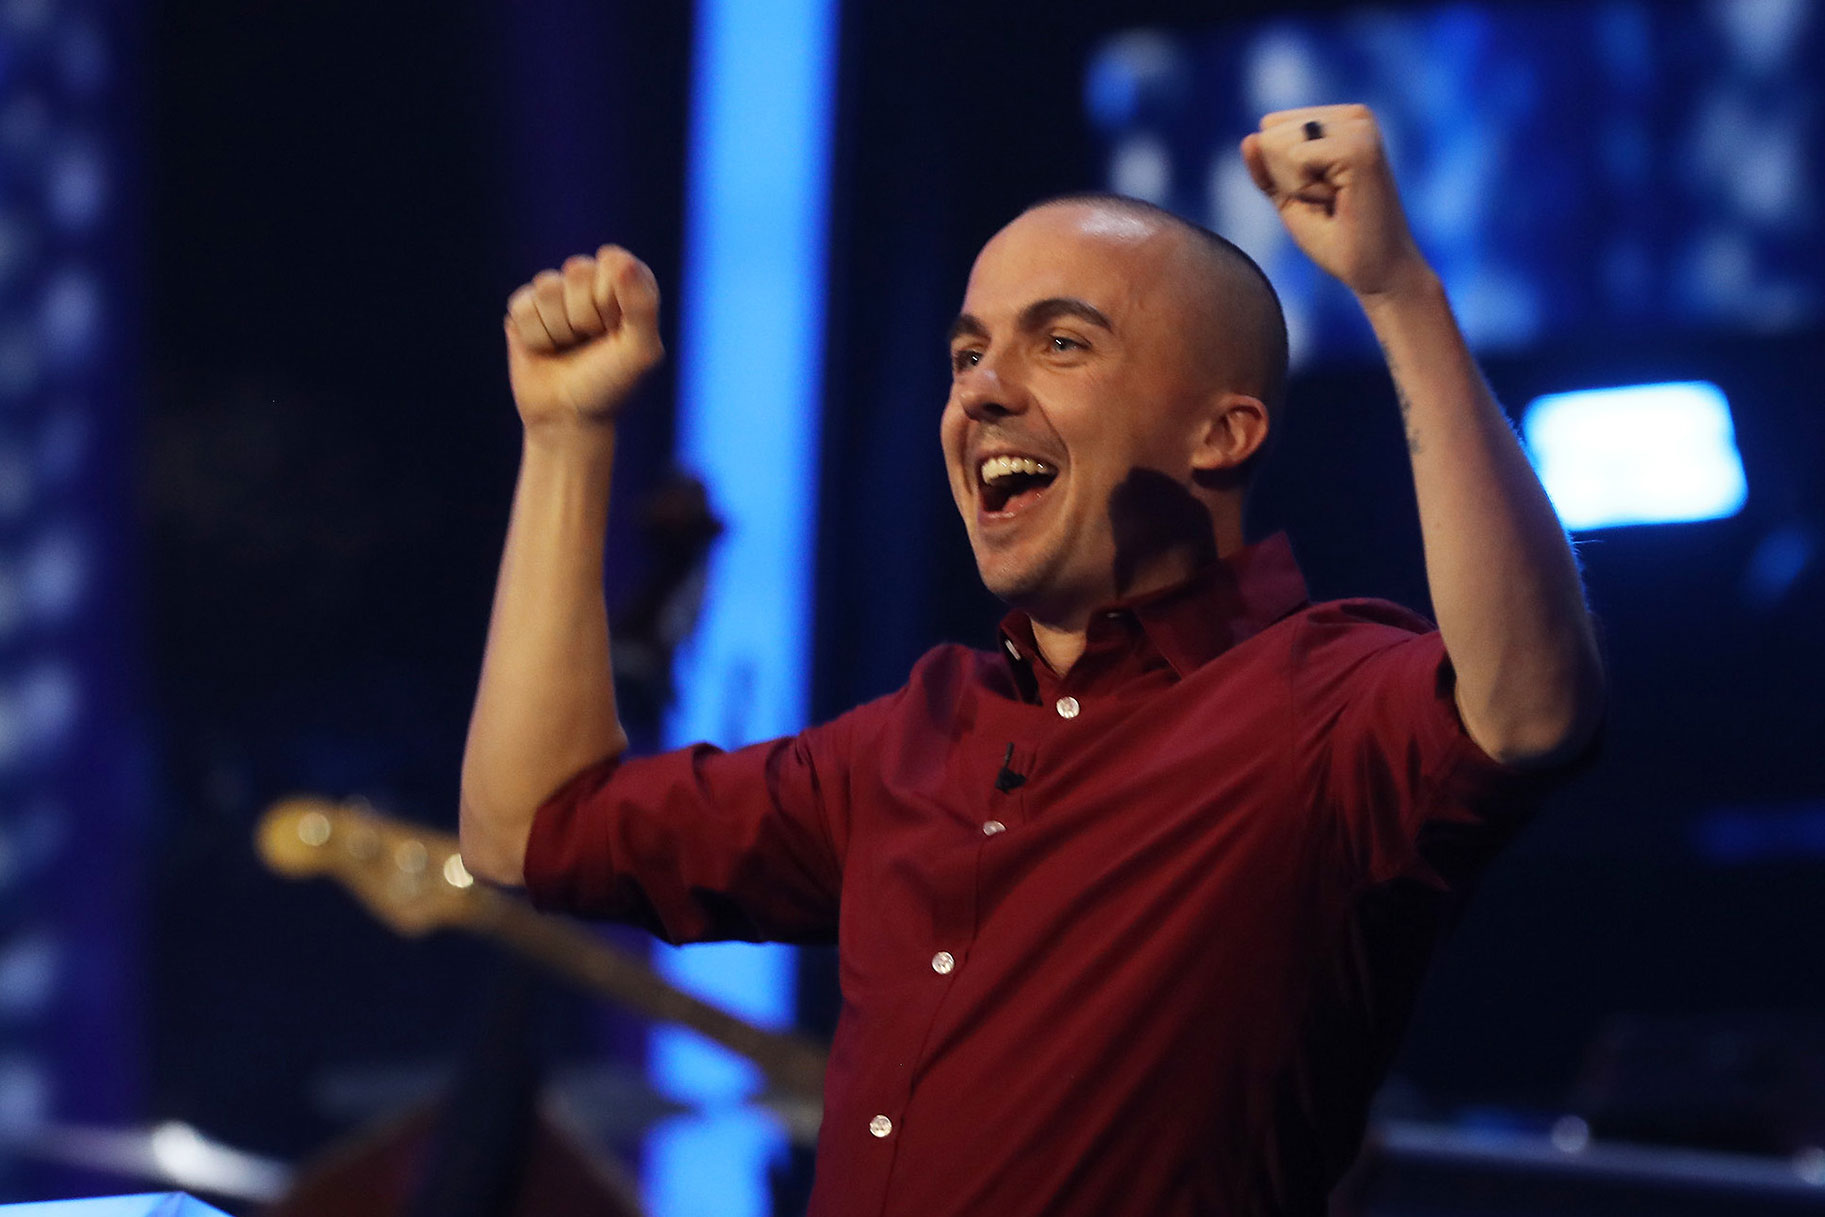 Image of Frankie Muniz with his arms up, cheering